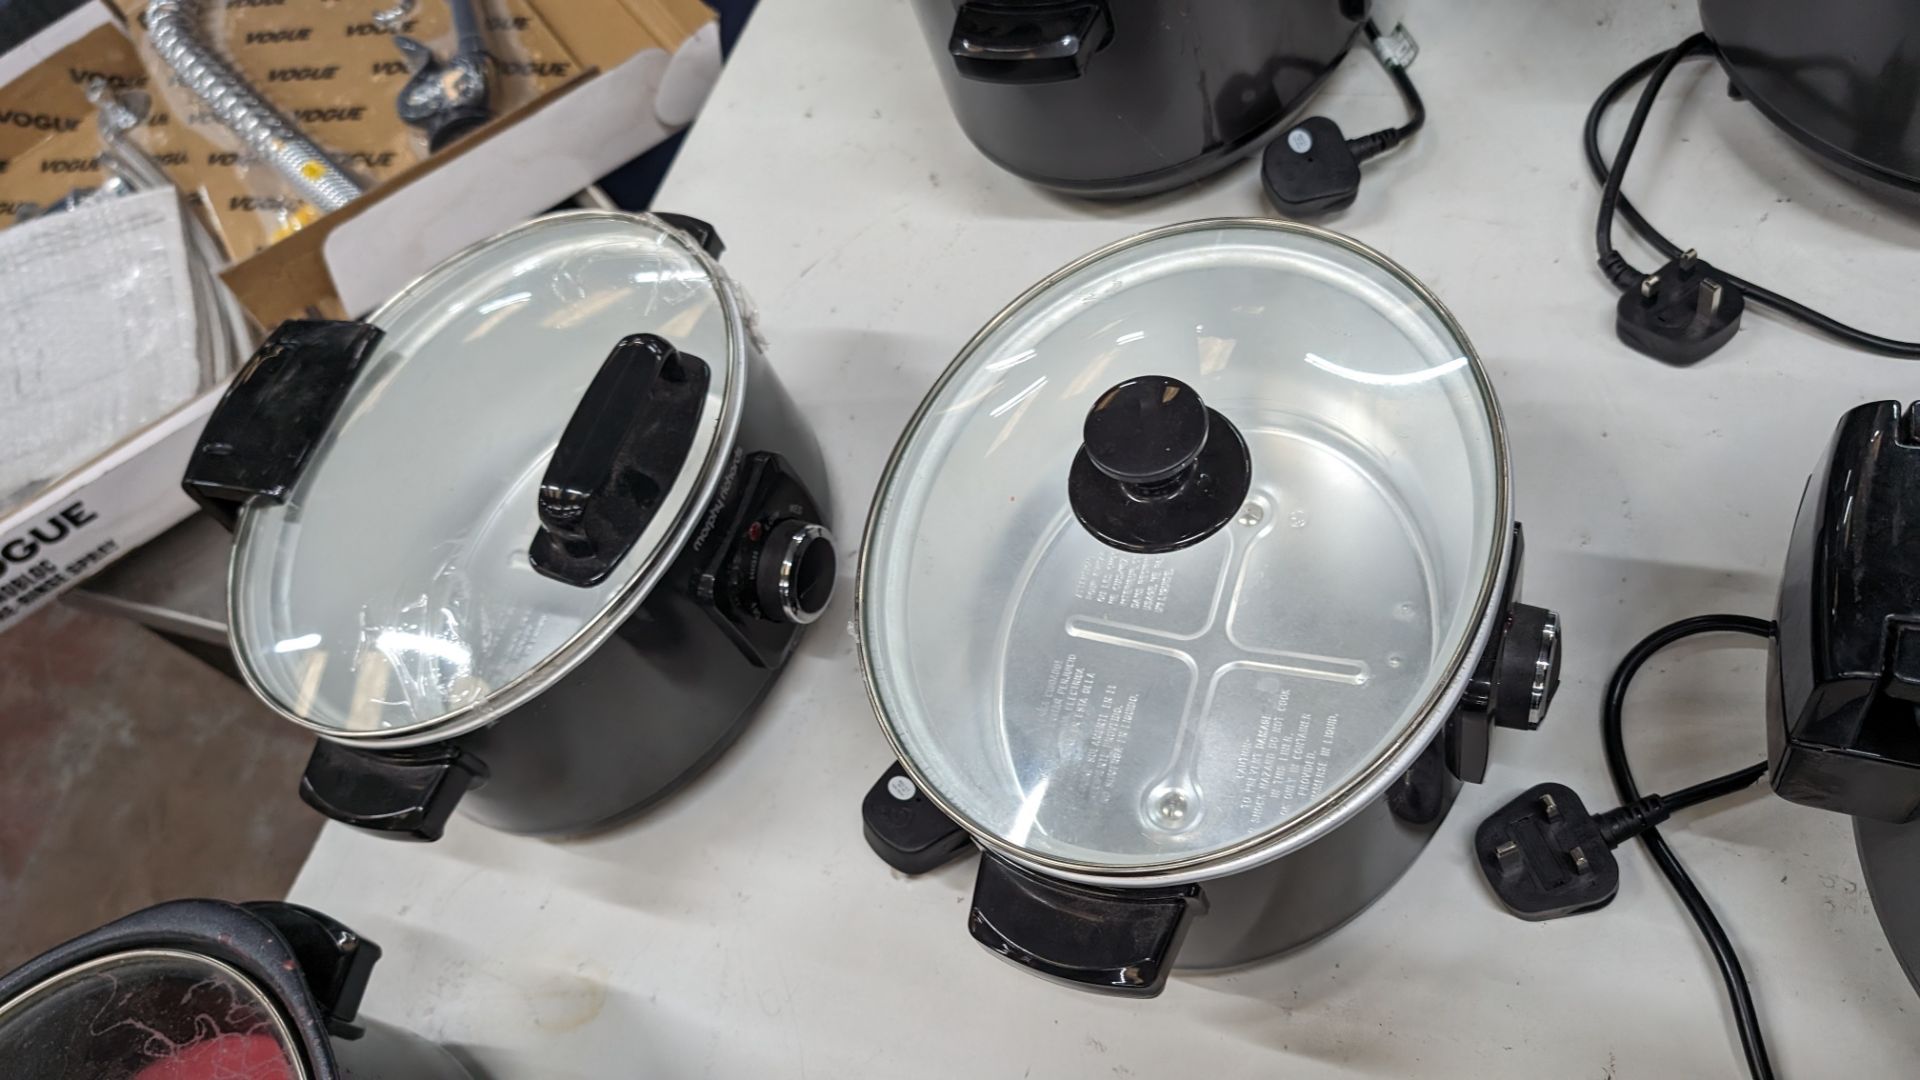 6 off Morphy Richards hinged lid slow cookers, model 460020. NB: At least some of these have been u - Image 9 of 10